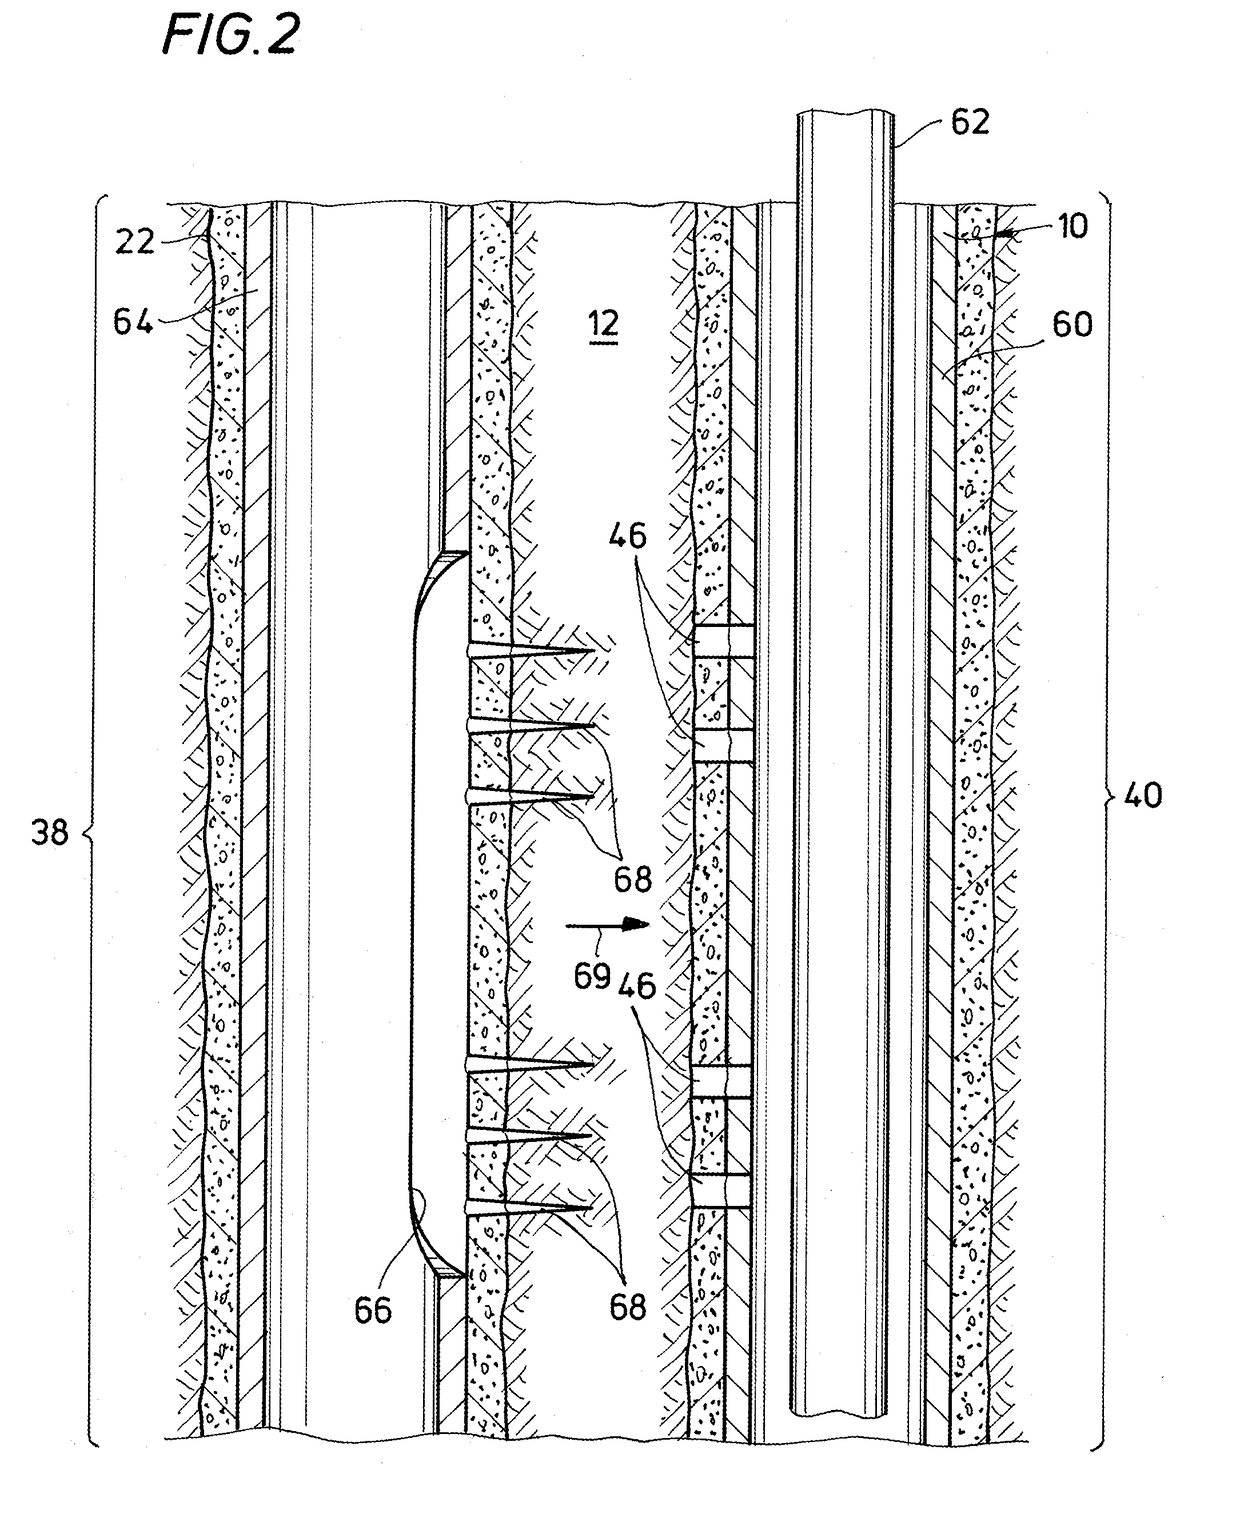 Method and System for Hydraulic Communication with Target Well from Relief Well